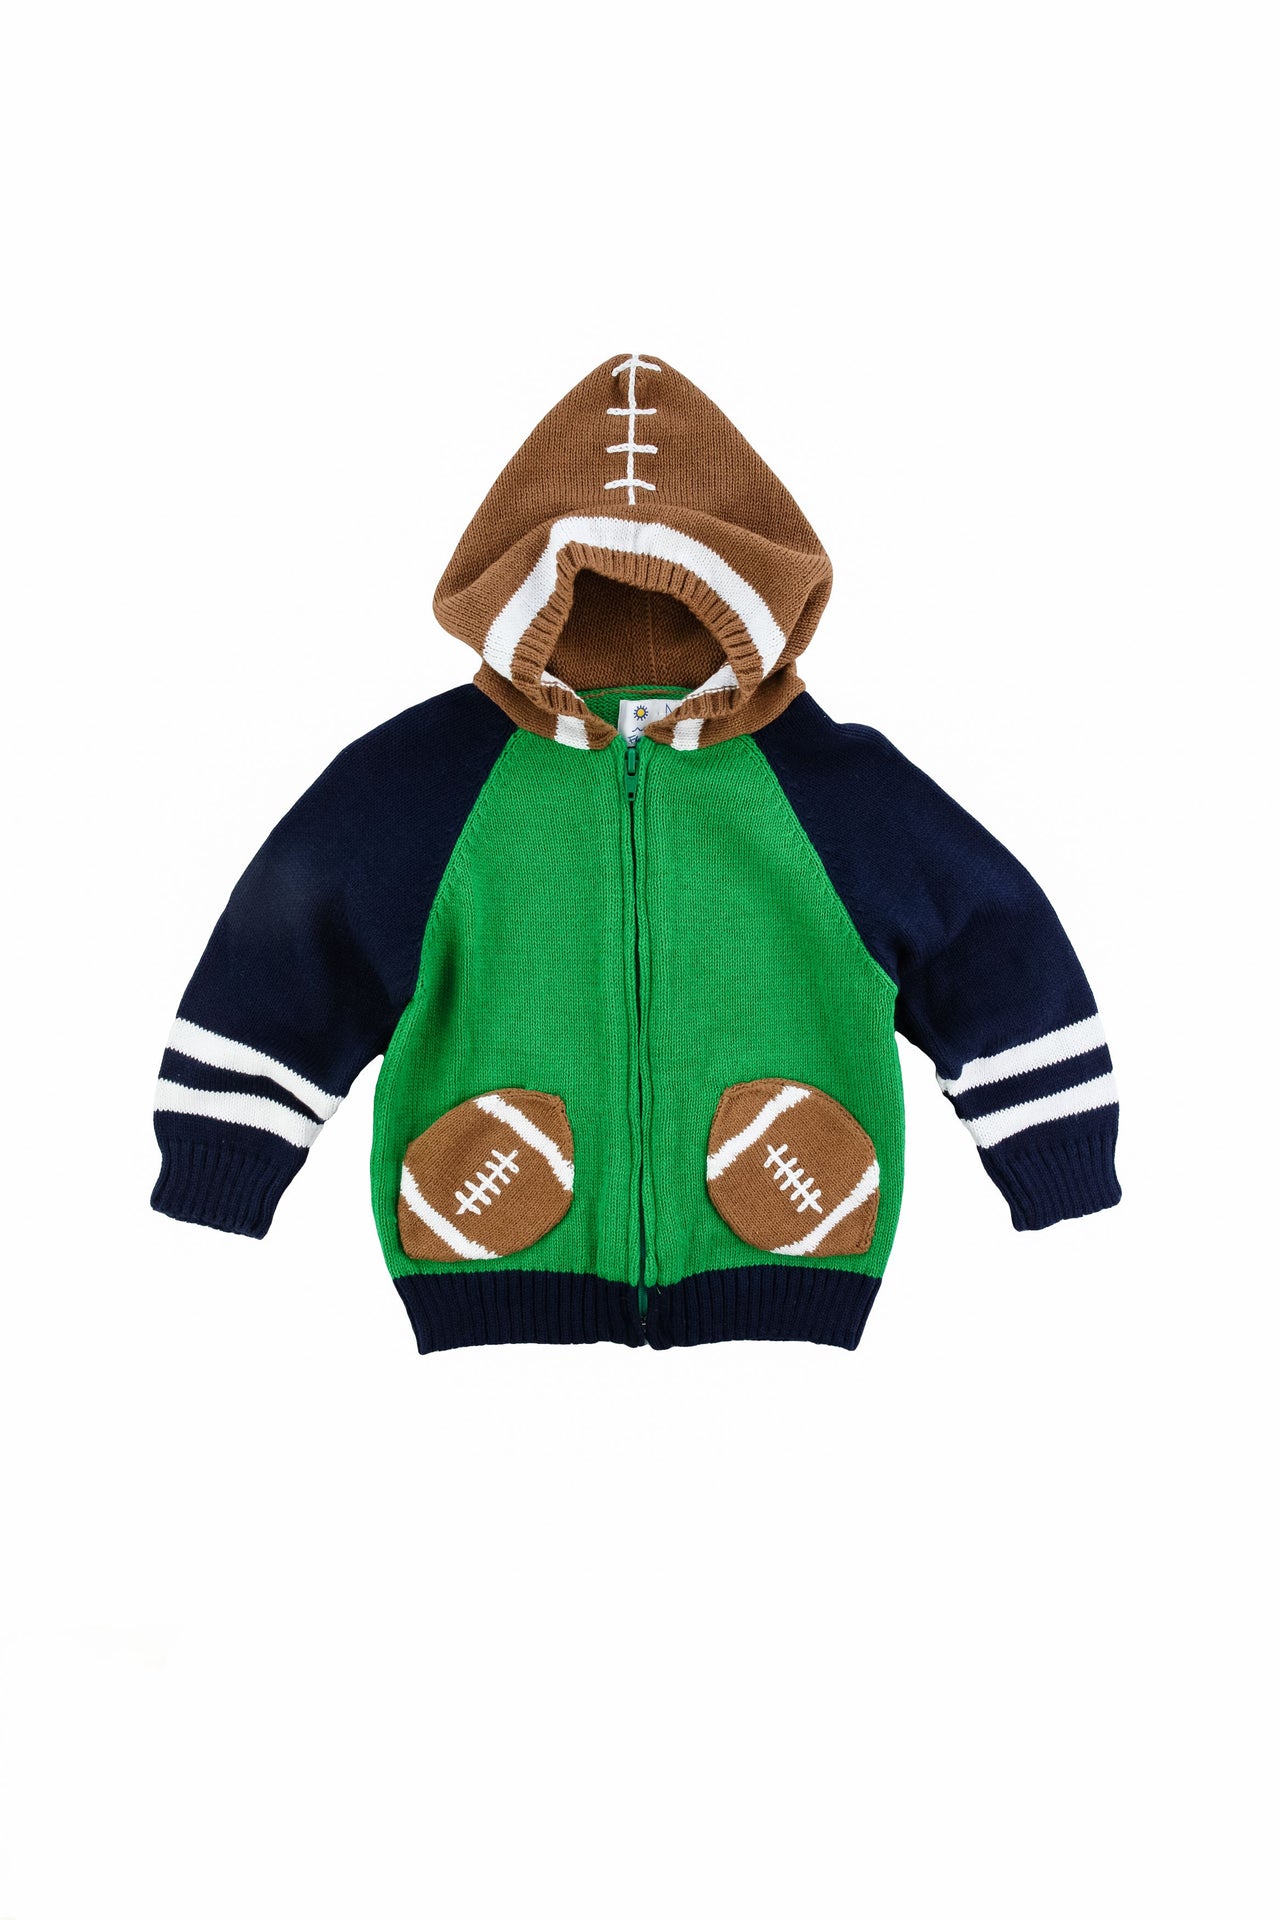 Florence Eiseman Sweater With Football Hood and Pockets F4956 5006